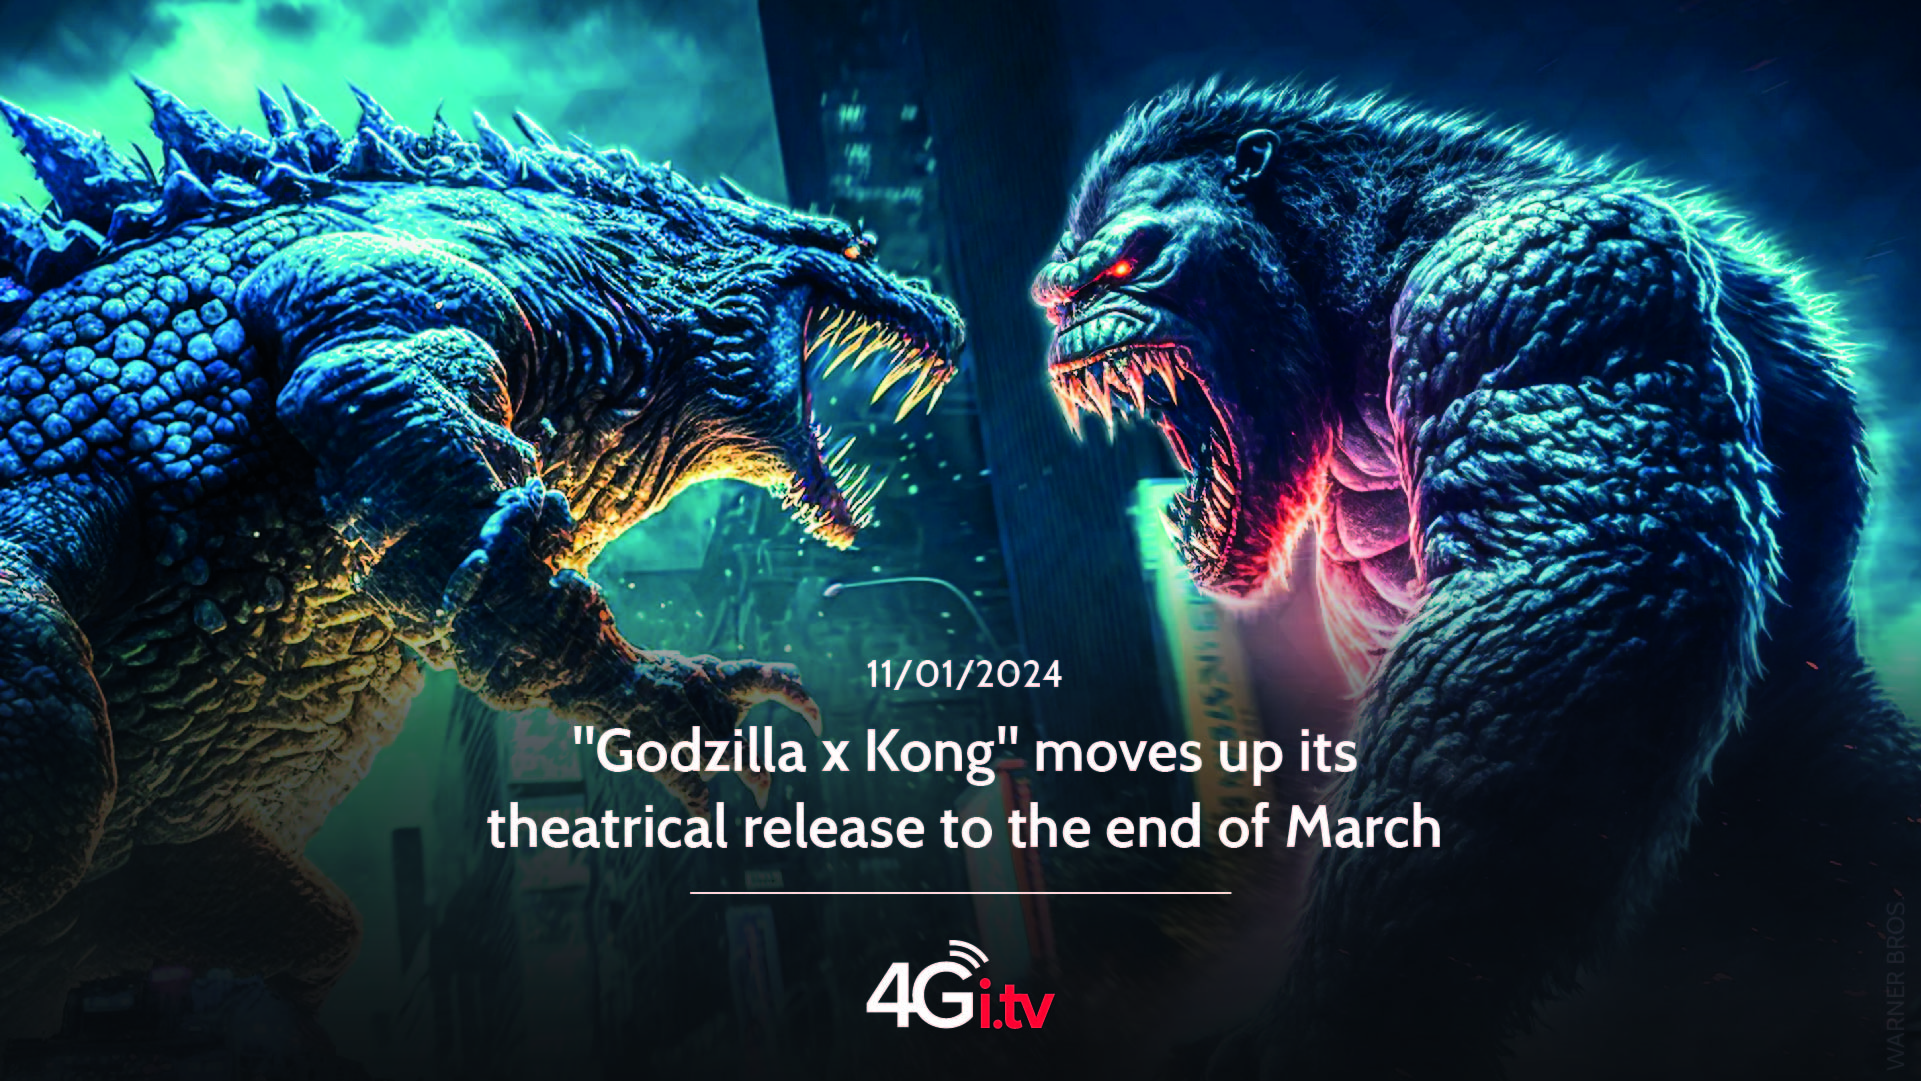 Lesen Sie mehr über den Artikel “Godzilla x Kong” moves up its theatrical release to the end of March